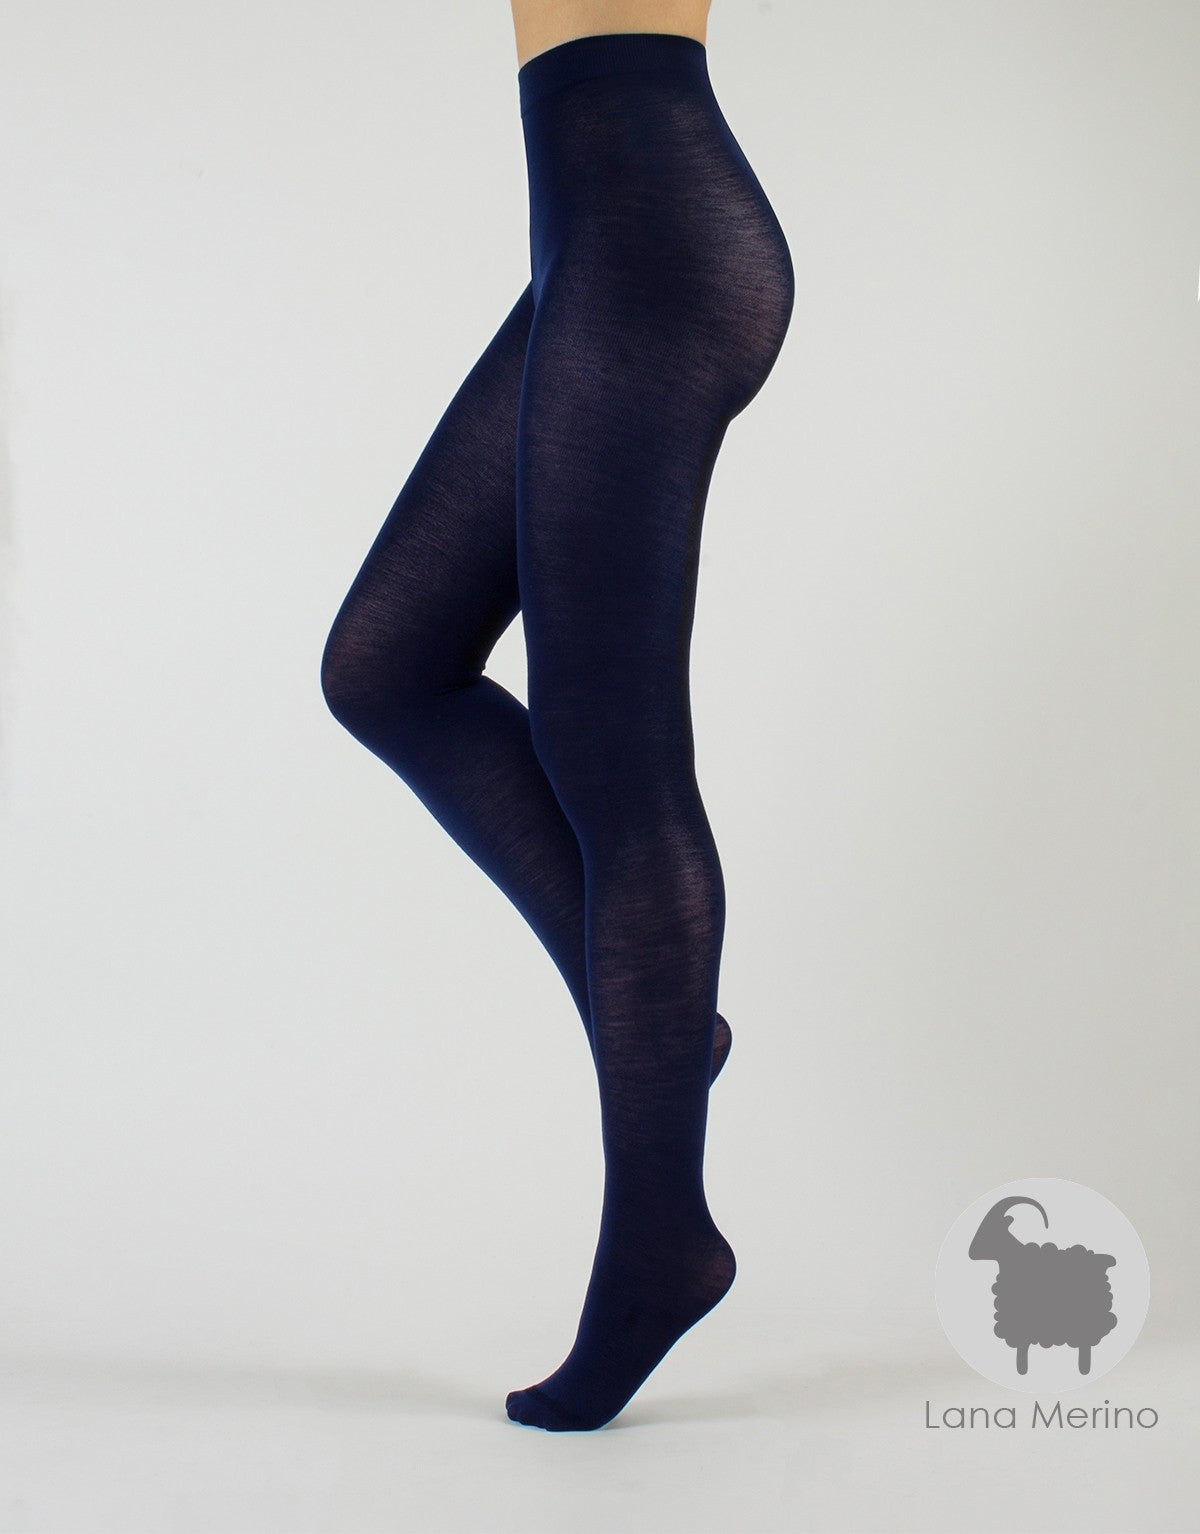 Calzitaly Navy Blue Merino Tights - Light and warm knitted thermal tights with deep waistband and gusset, perfect for cold Winters.